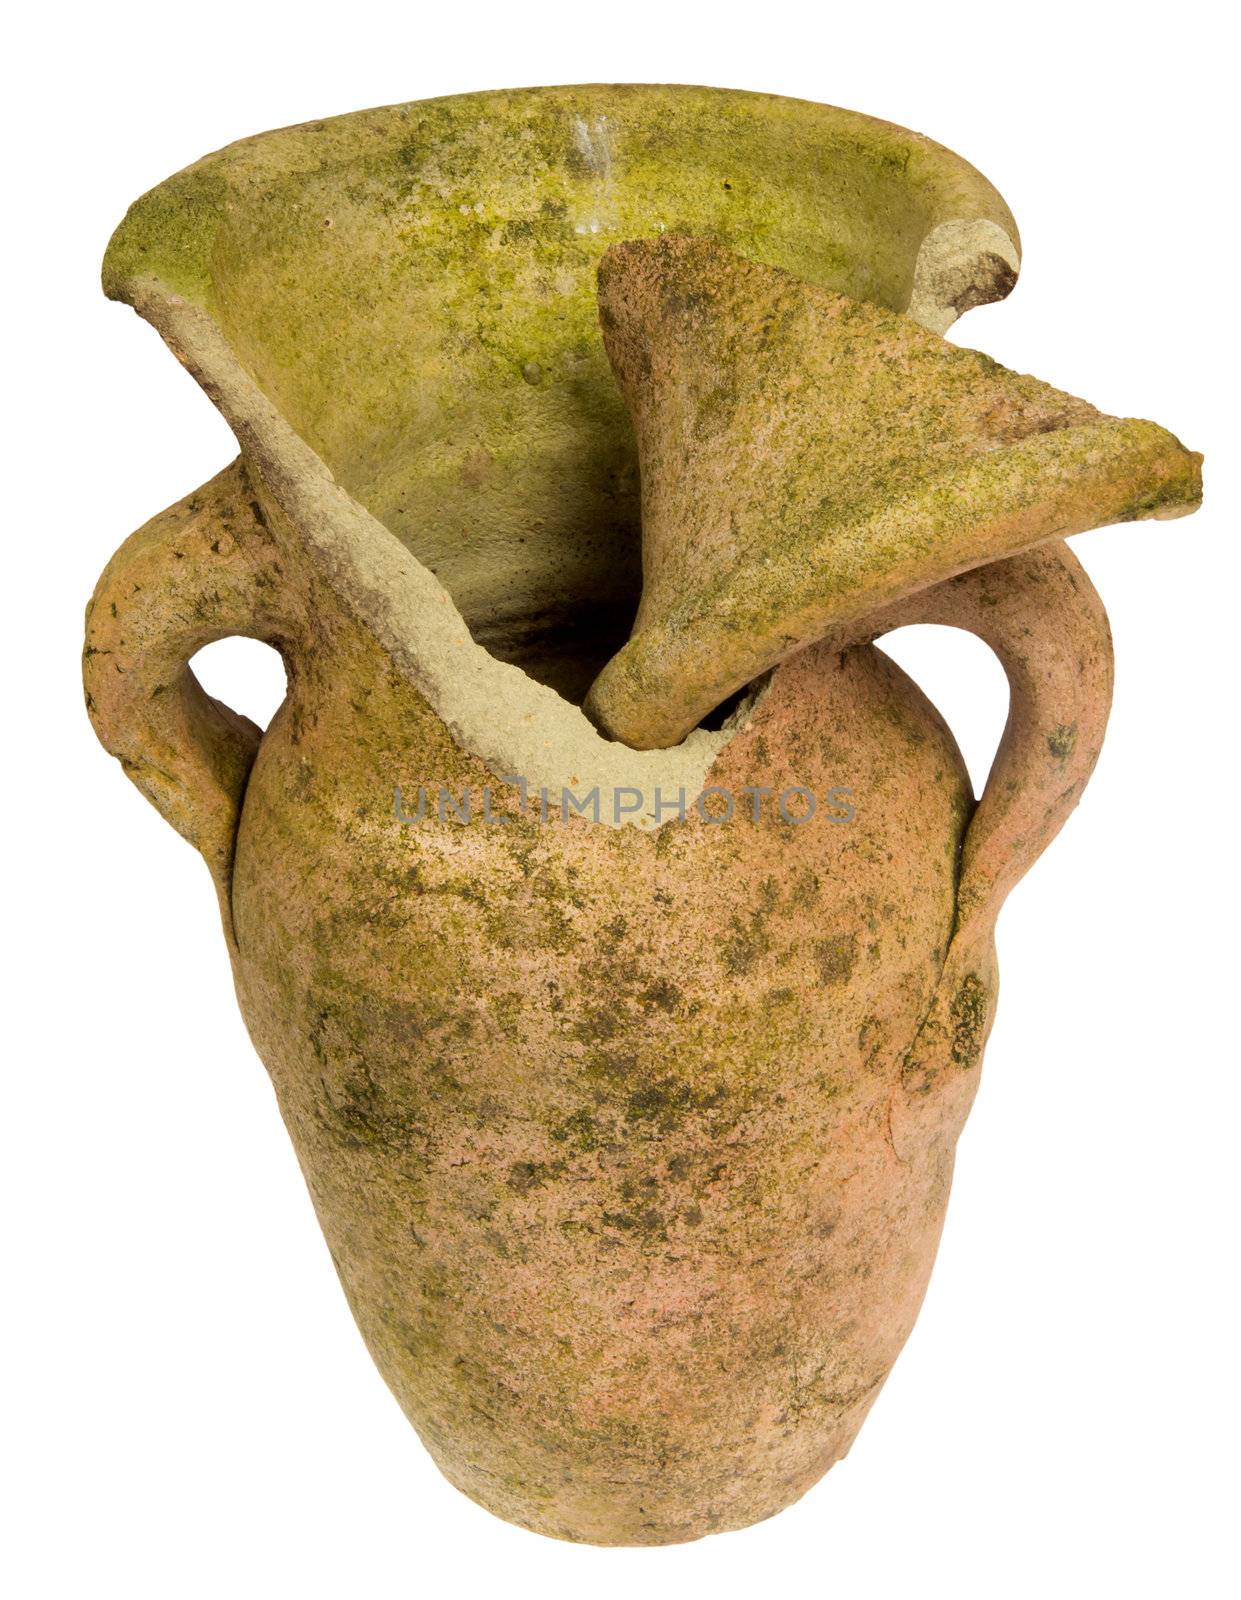 Broken clay jar, isolated on background